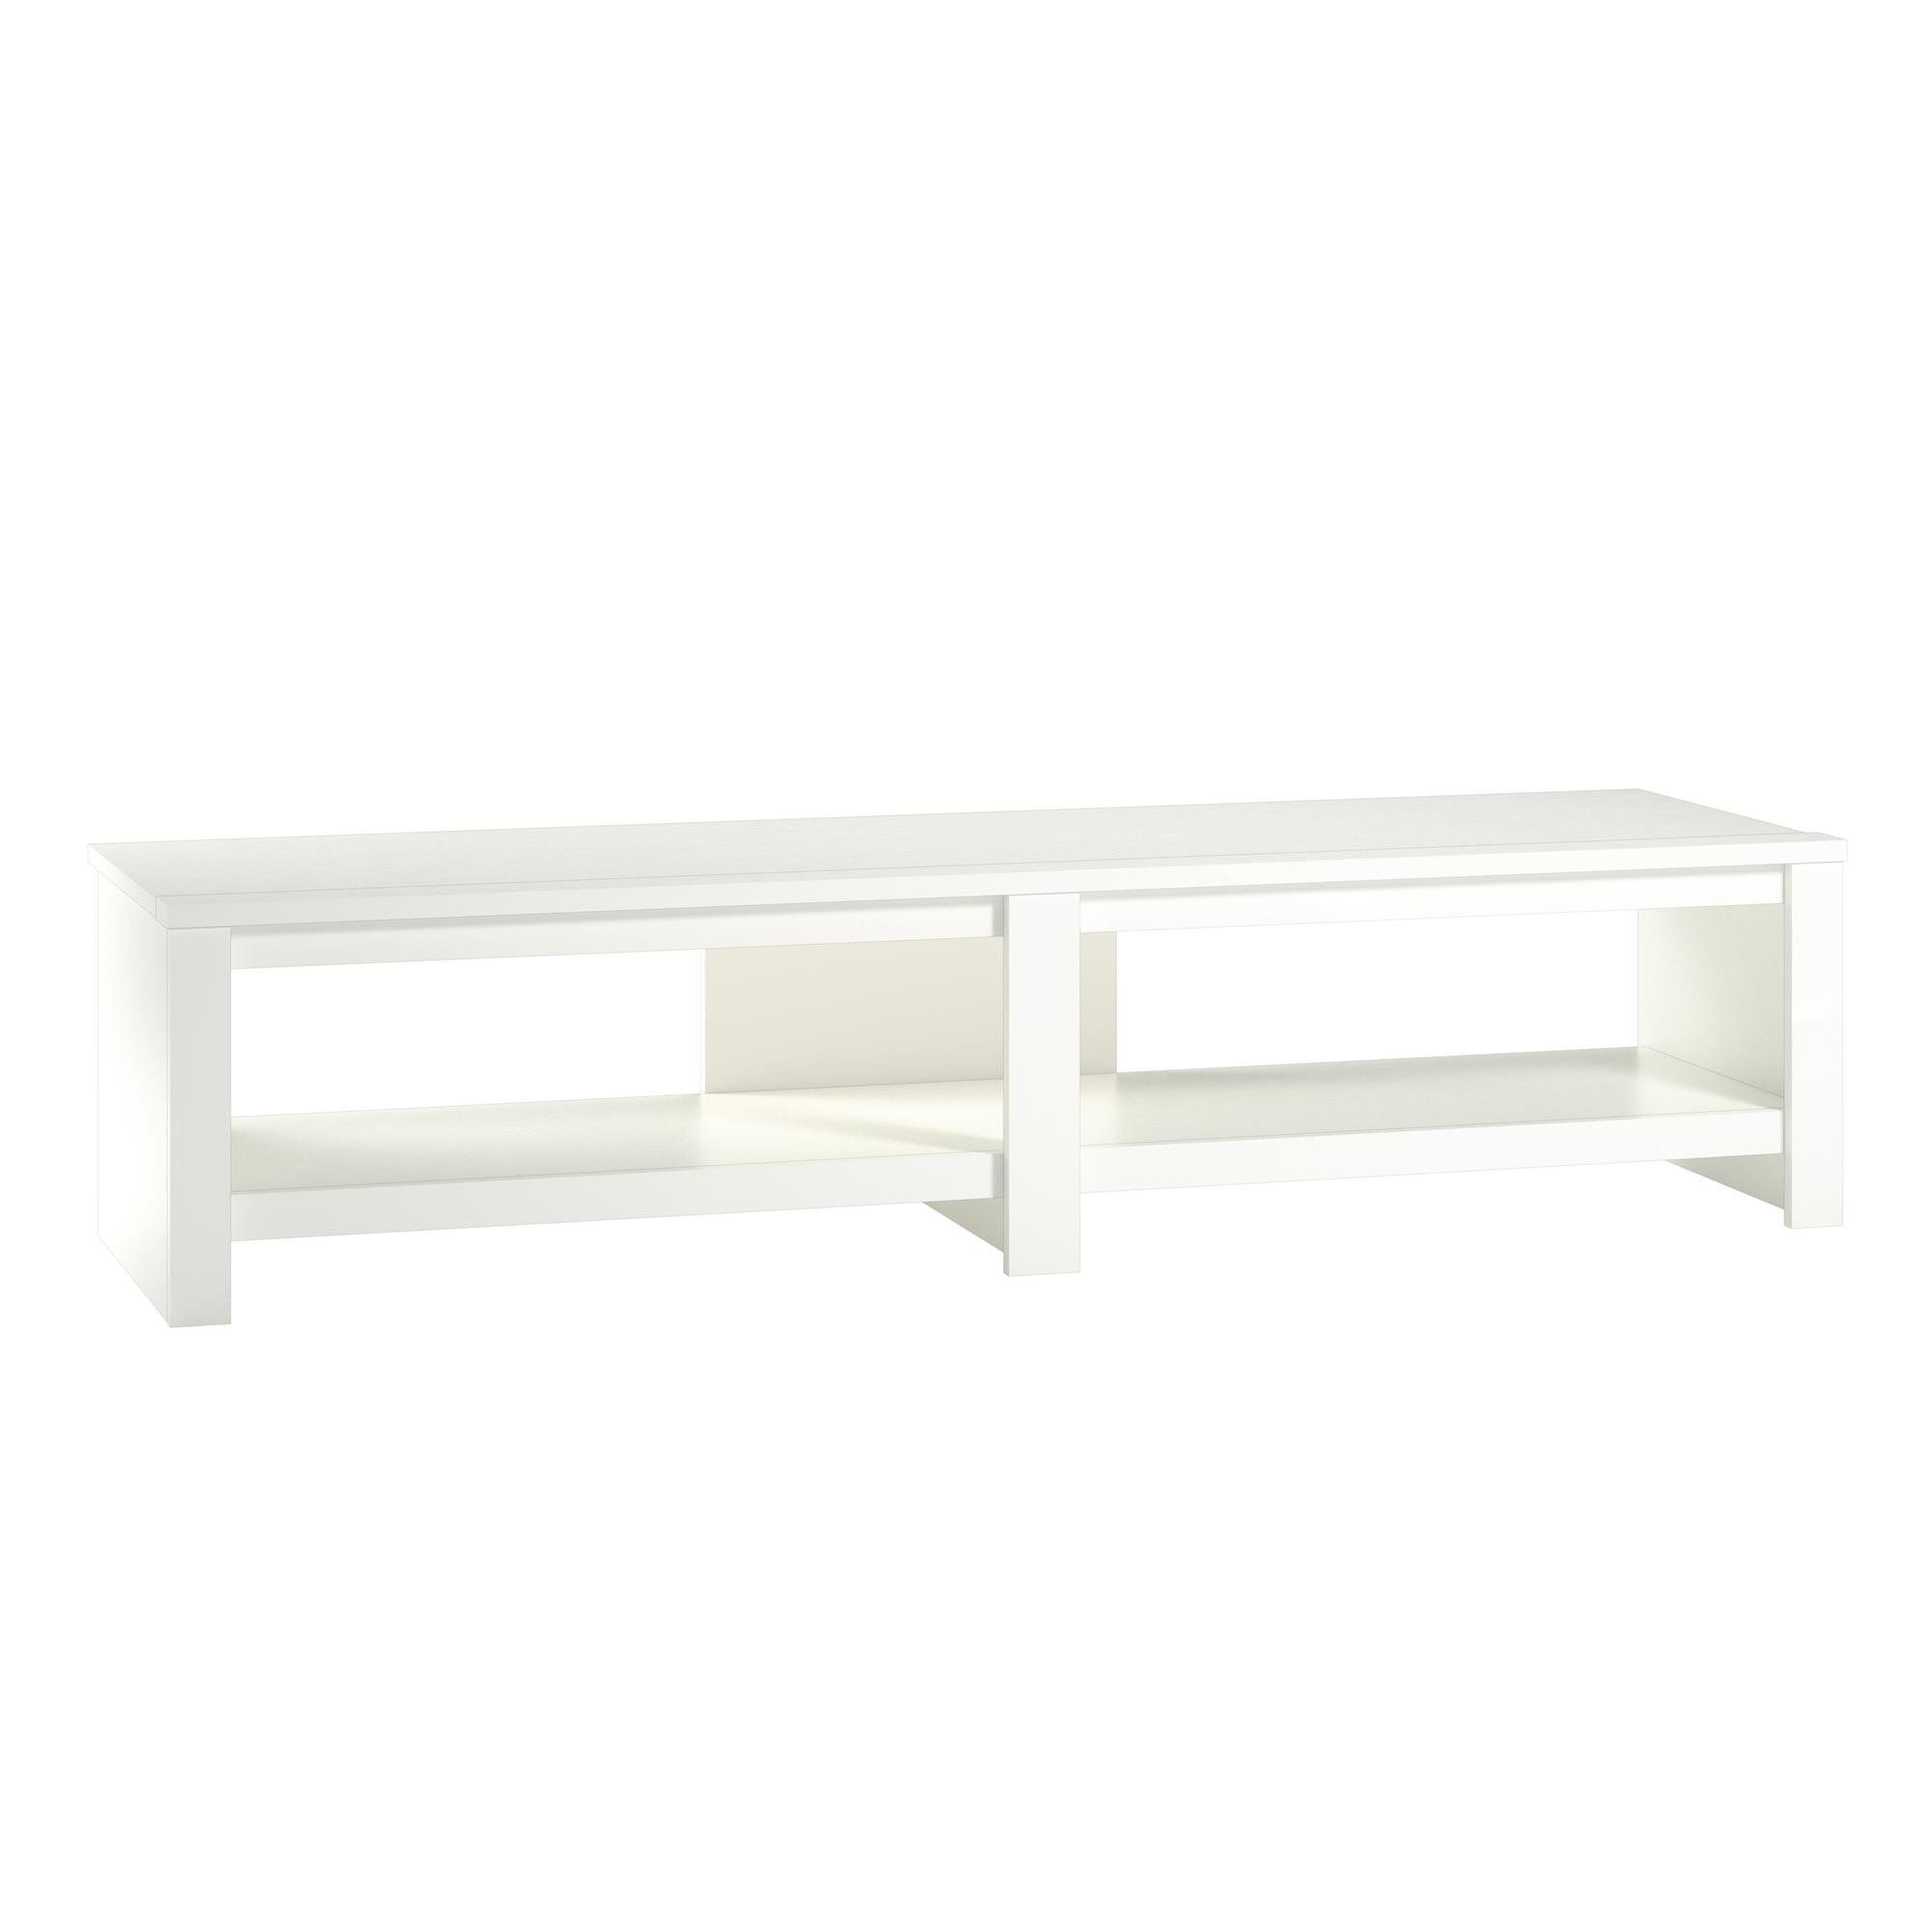 Modern & Contemporary Low Profile Tv Console | Allmodern Within Walton 74 Inch Open Tv Stands (View 17 of 20)